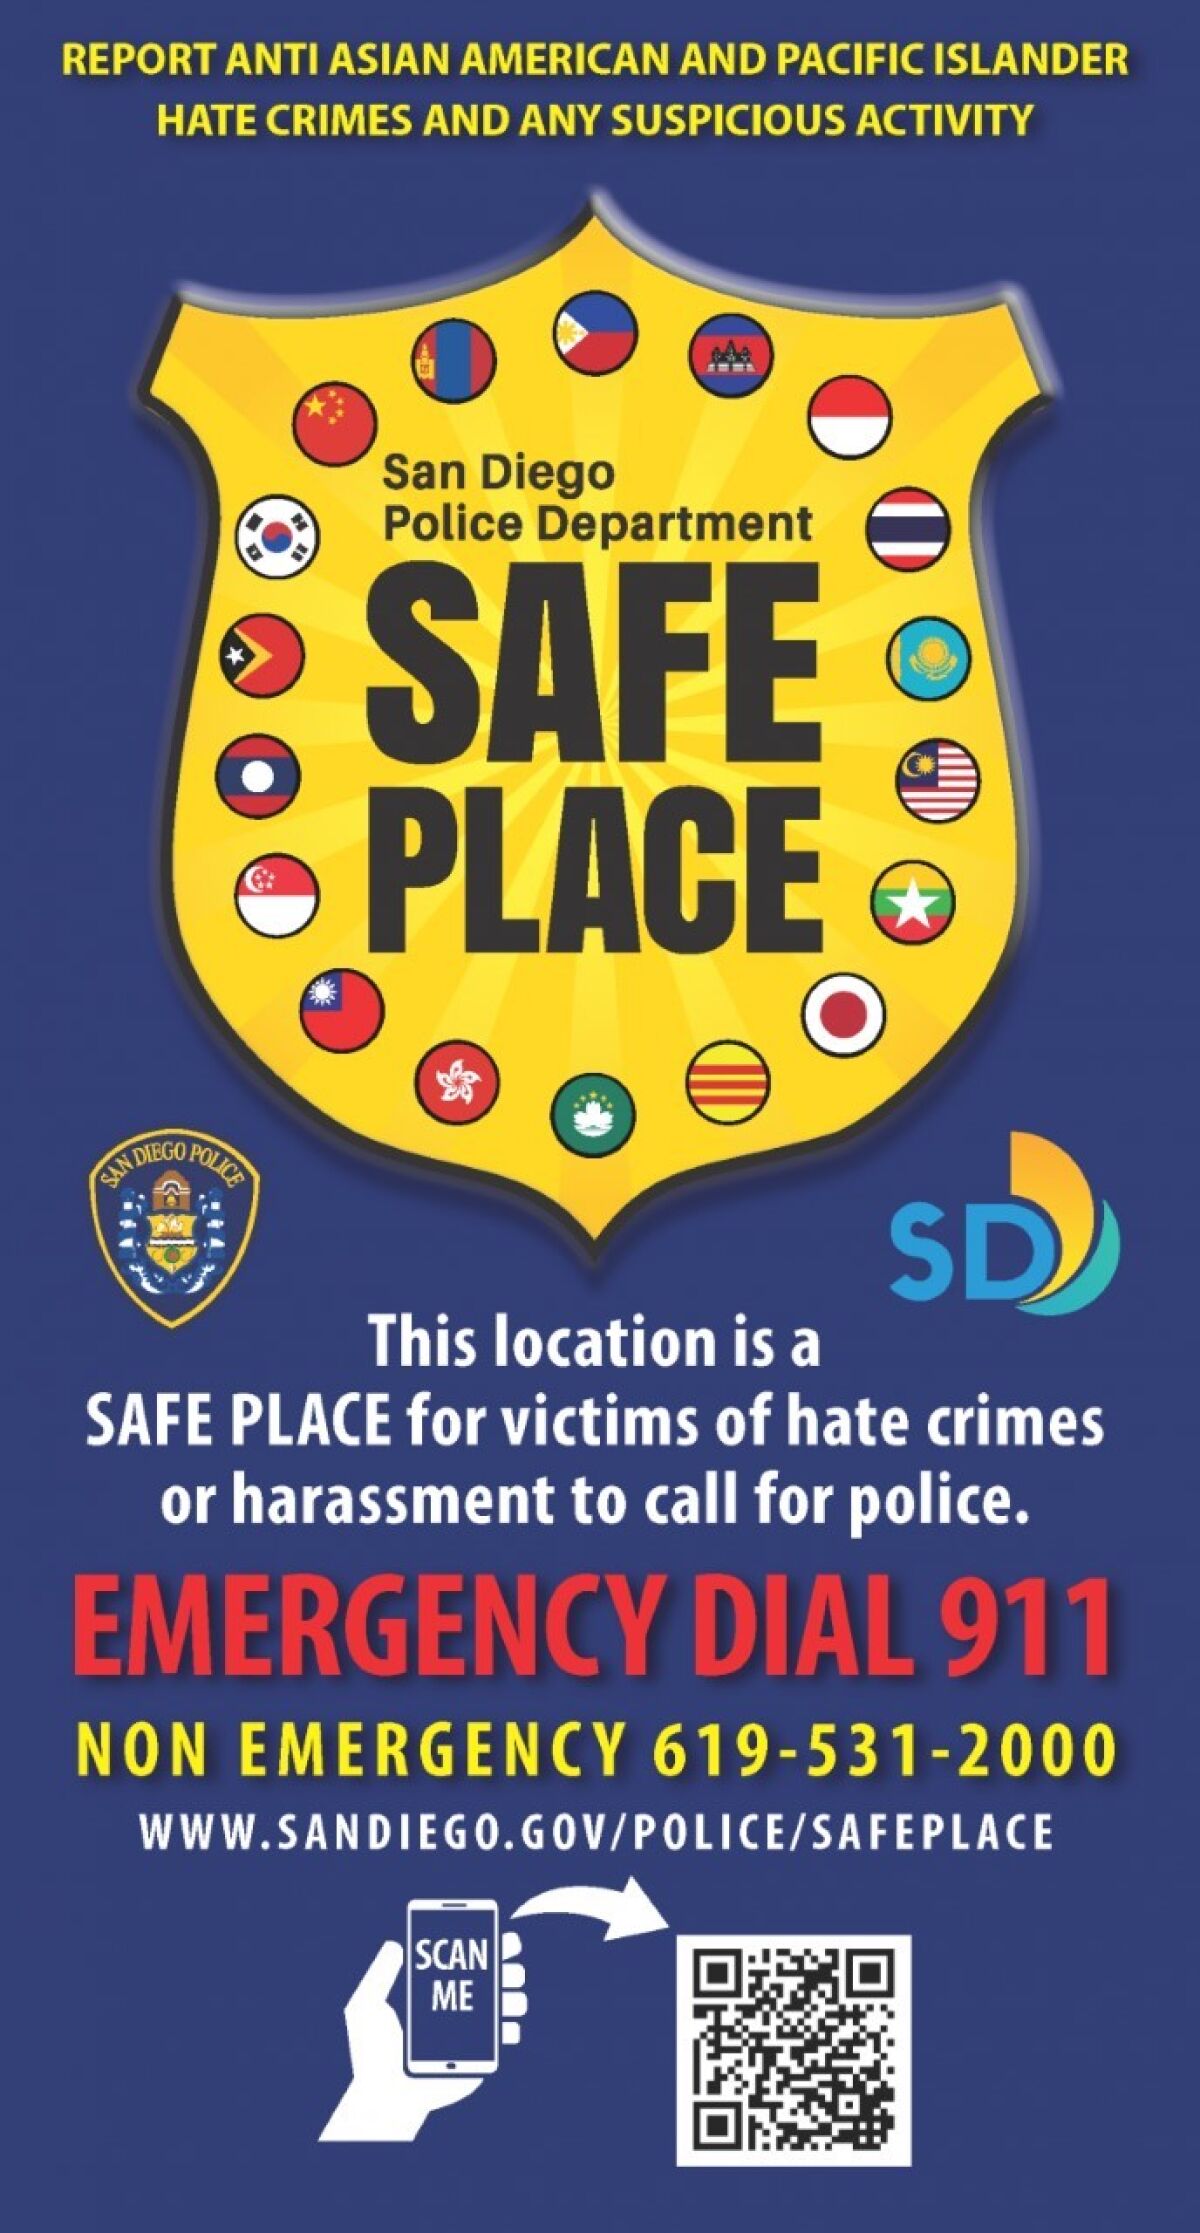 This decal will be displayed at participating La Jolla businesses as part of San Diego's "Safe Place" program.